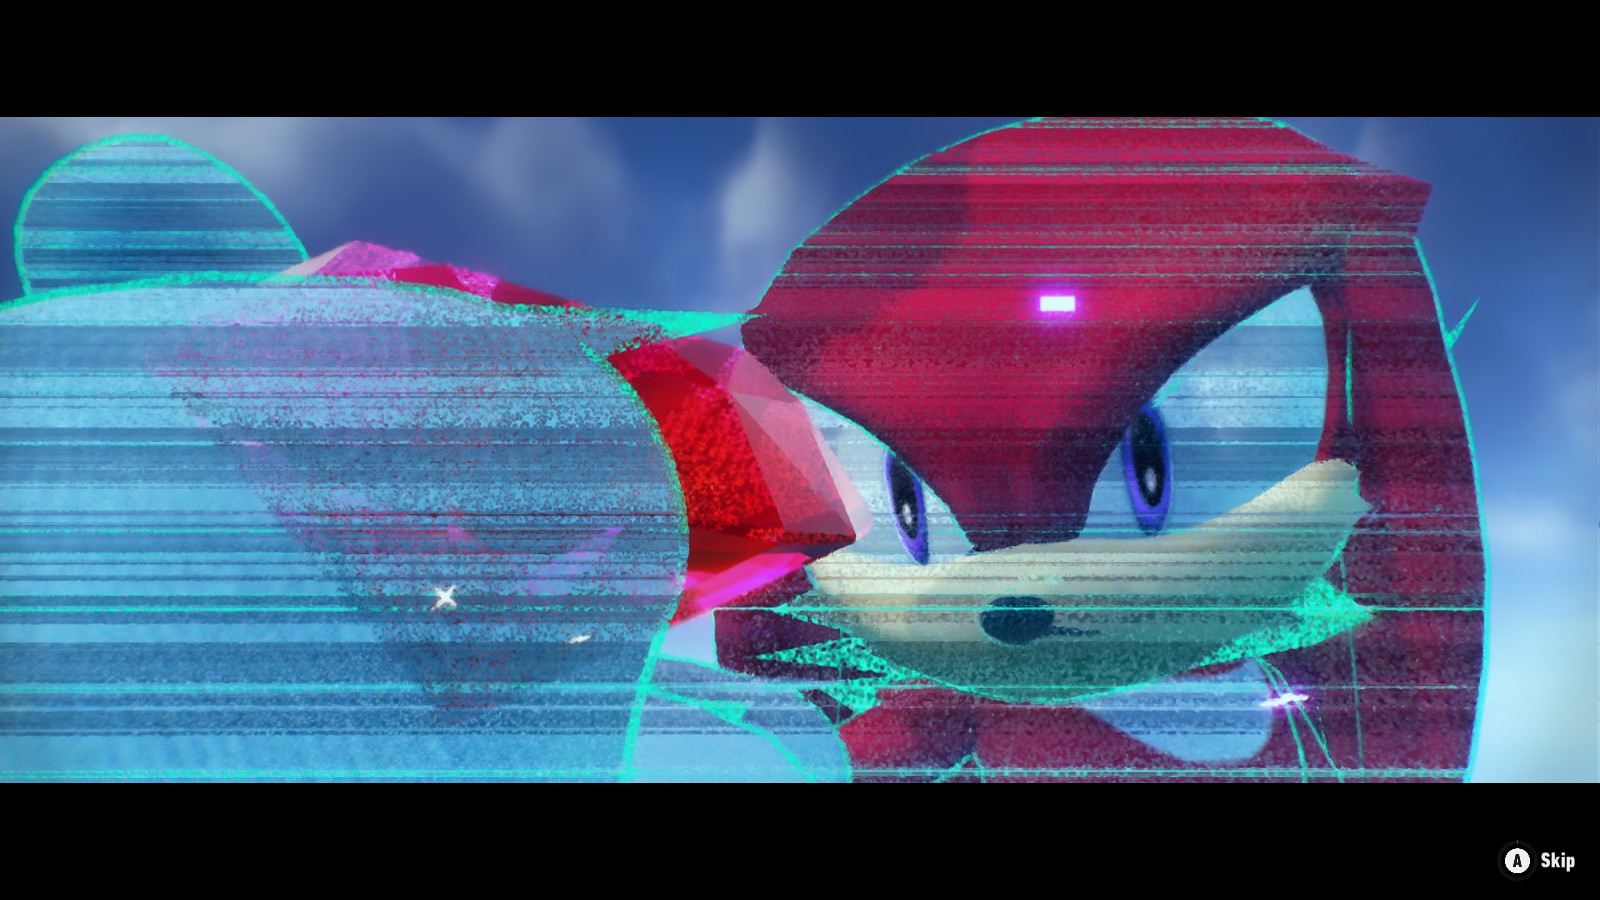 A screenshot of Sonic Frontiers, showing Knuckles obtaining the red Chaos Emerald